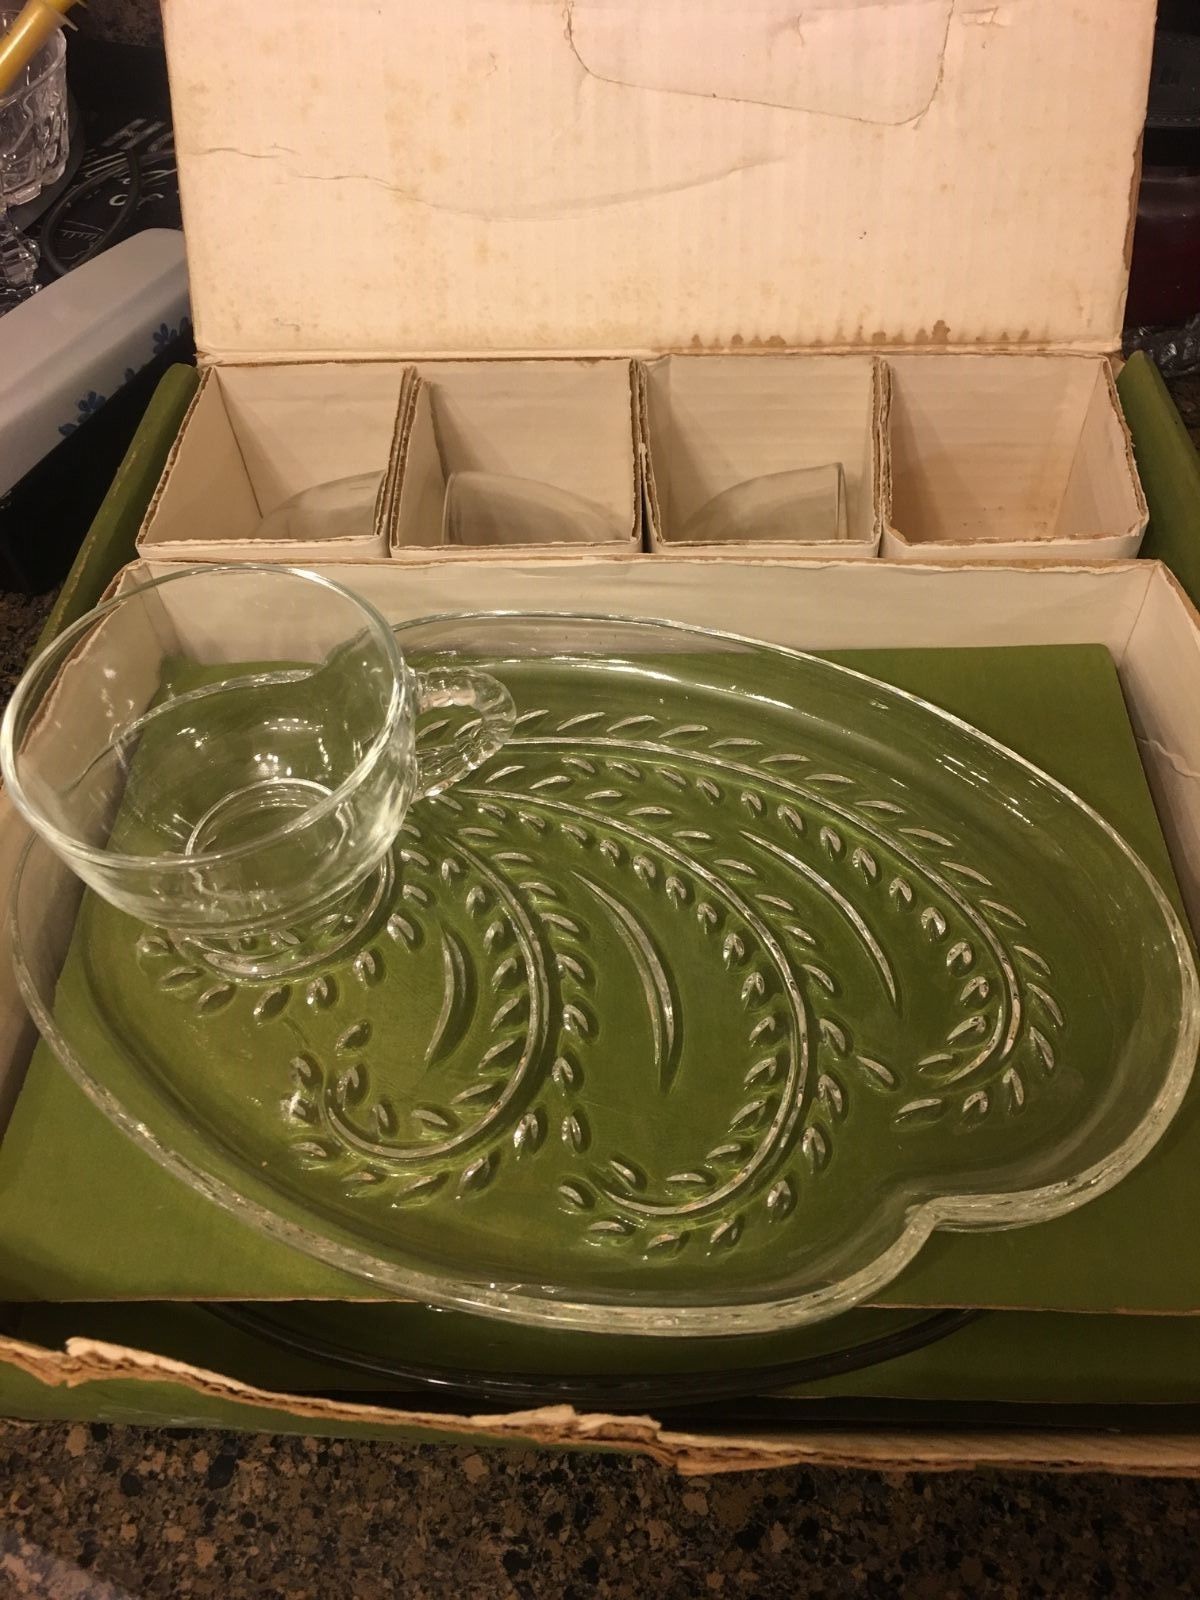 8 Pc Federal Glass Company Hospitality Snack Set Wheat Pattern 4 Plates 4 Cups - $20.29